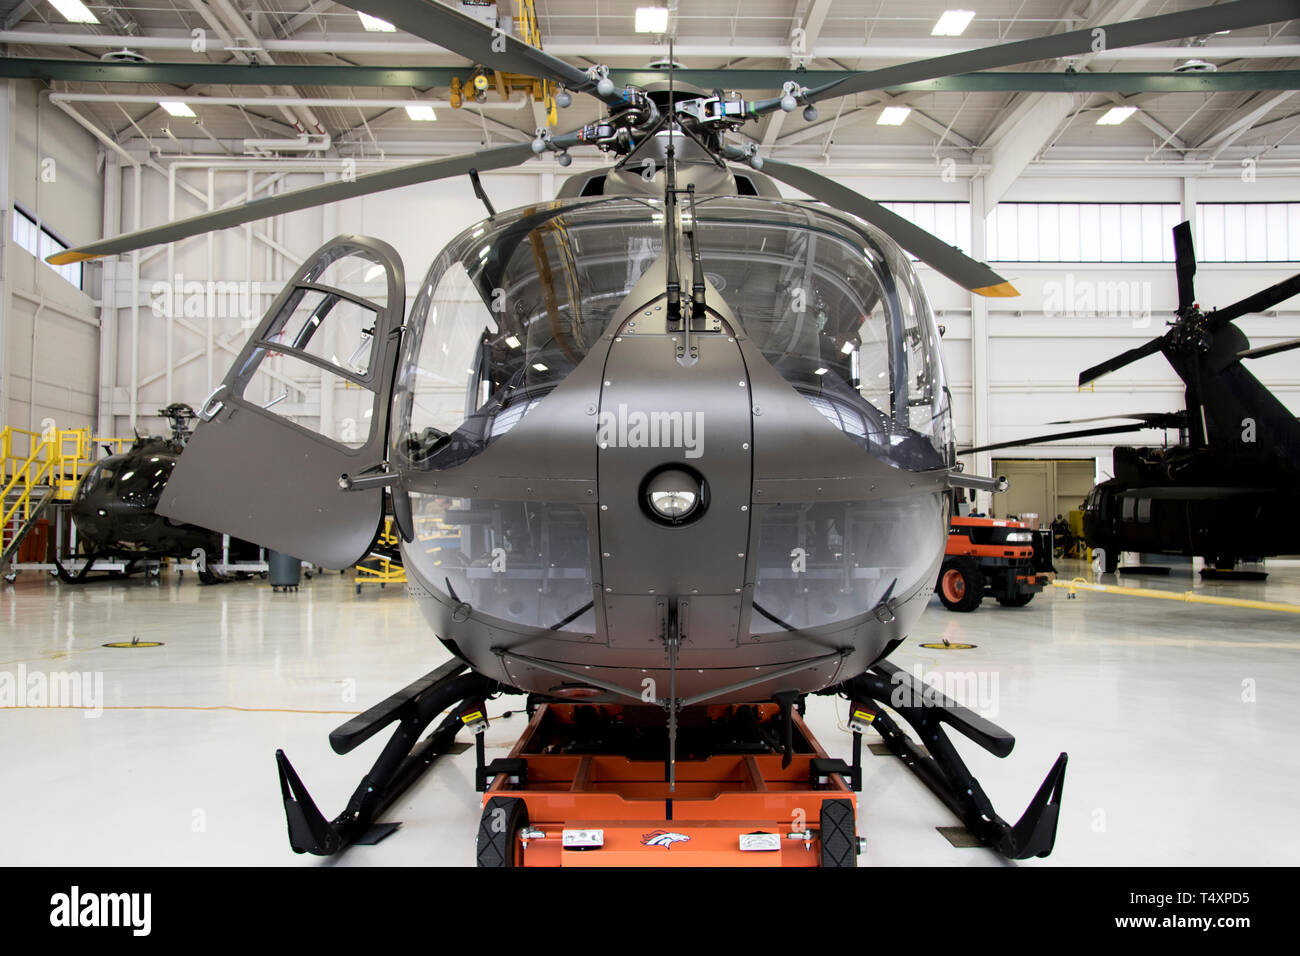 A UH-72 Lakota helicopter awaits maintenance at the High Altitude Army National Guard Aviation Training Site, Gypsum, Colo., April 18th 2019. HAATS trains aviators from all branches of the military about power management in various airframes. (U.S. Army National Guard photo by Spc. Michael Hunnisett) Stock Photo